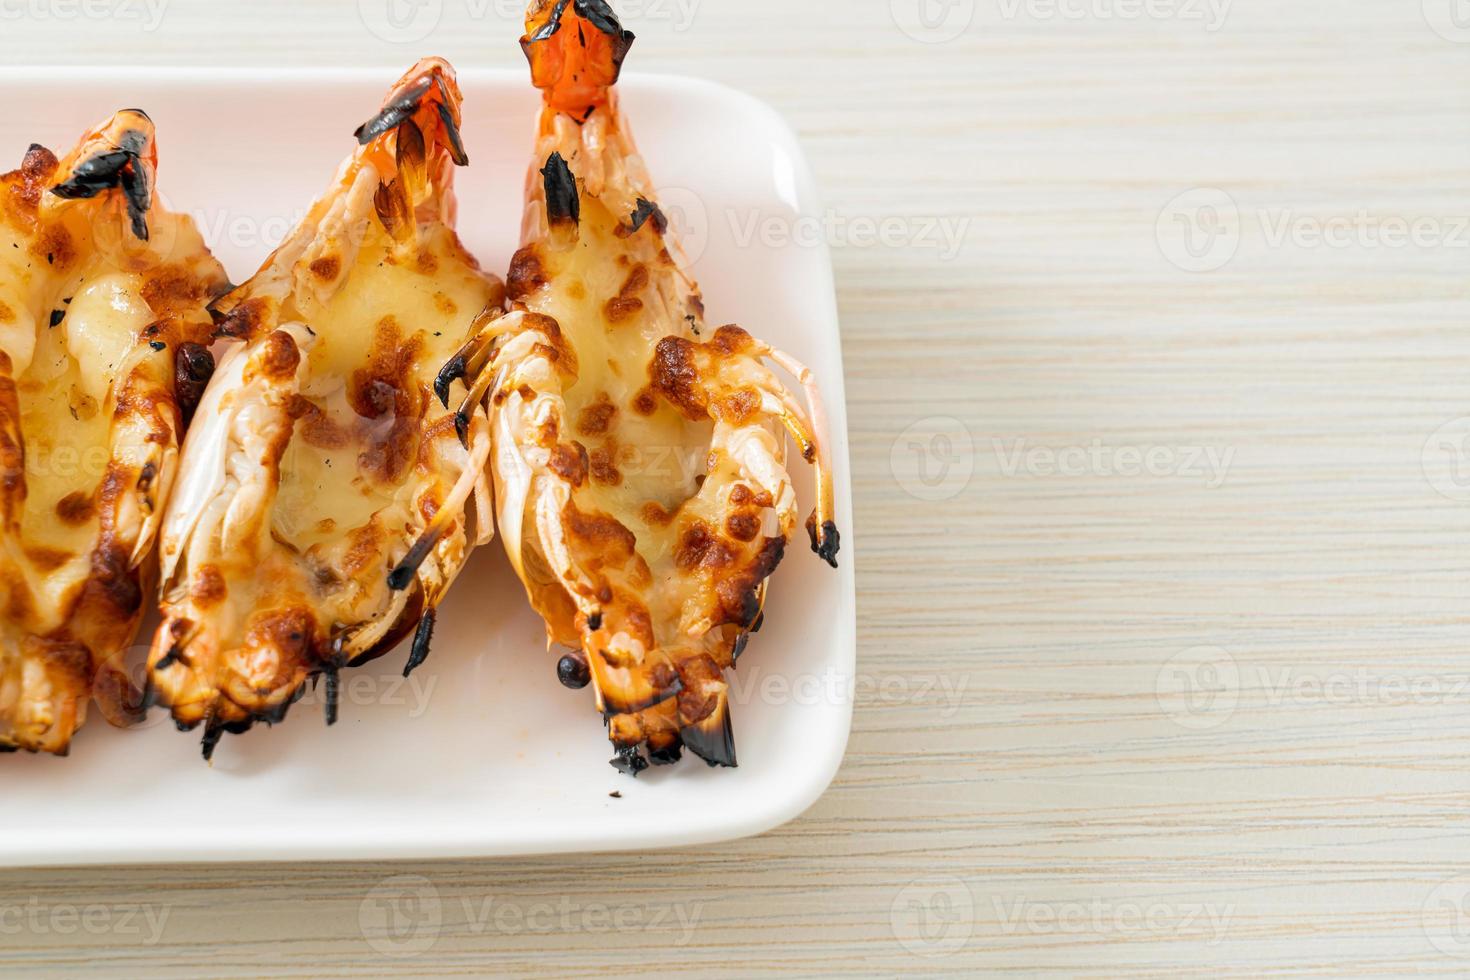 Grilled river prawns or shrimps with cheese - seafood style photo